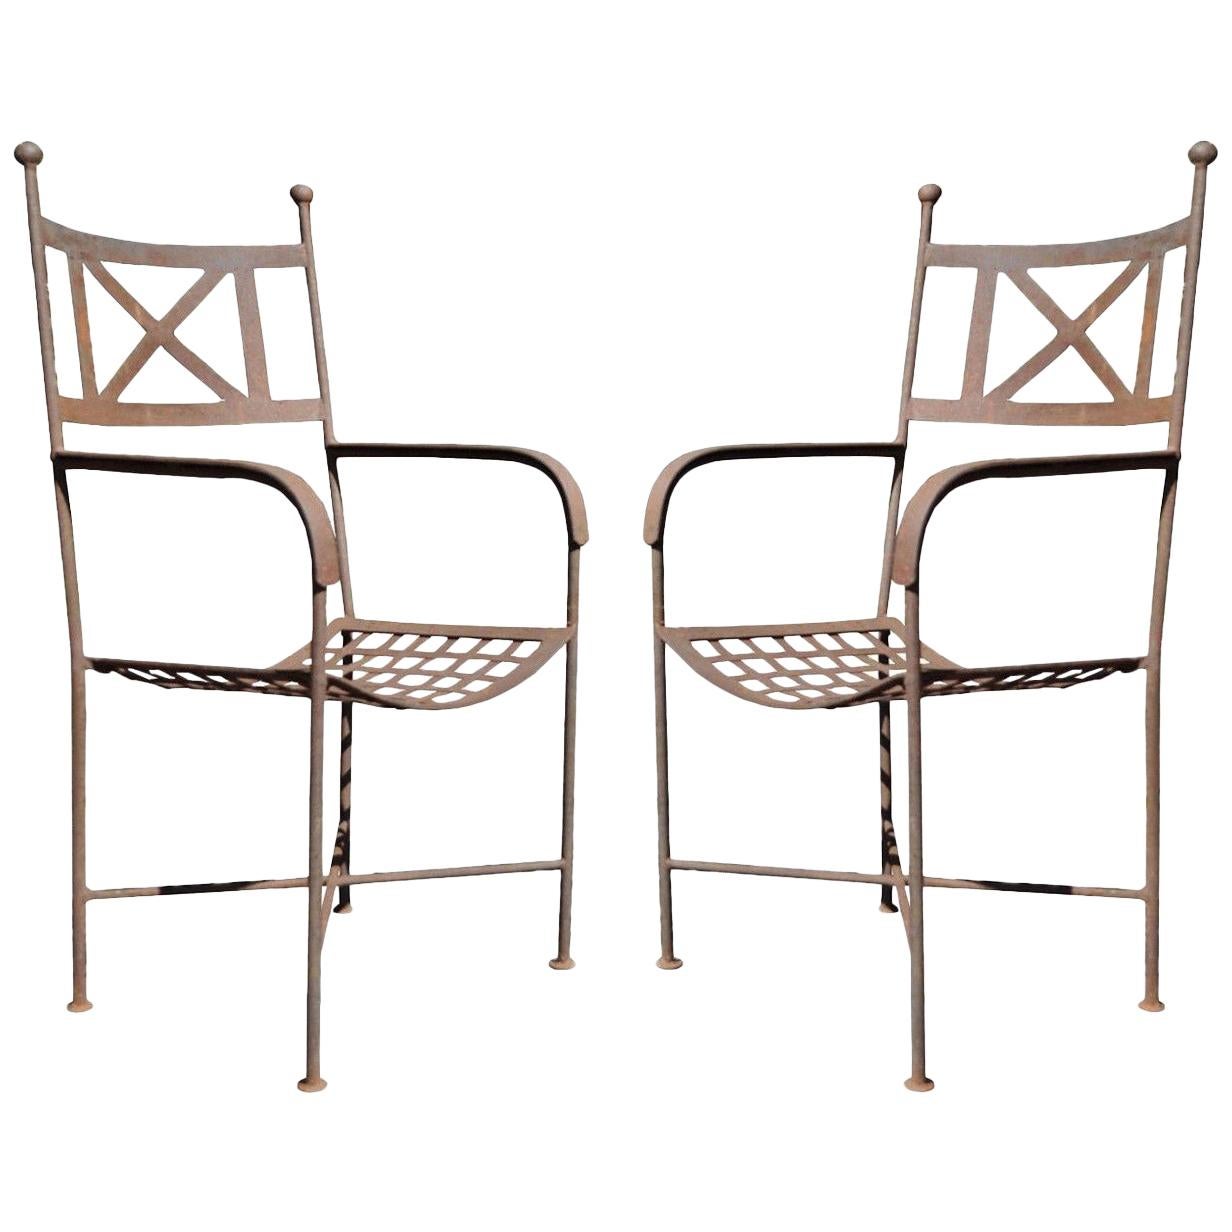 Vintage Neoclassical Regency Style Iron X-Form Stretcher Garden Armchairs, Pair